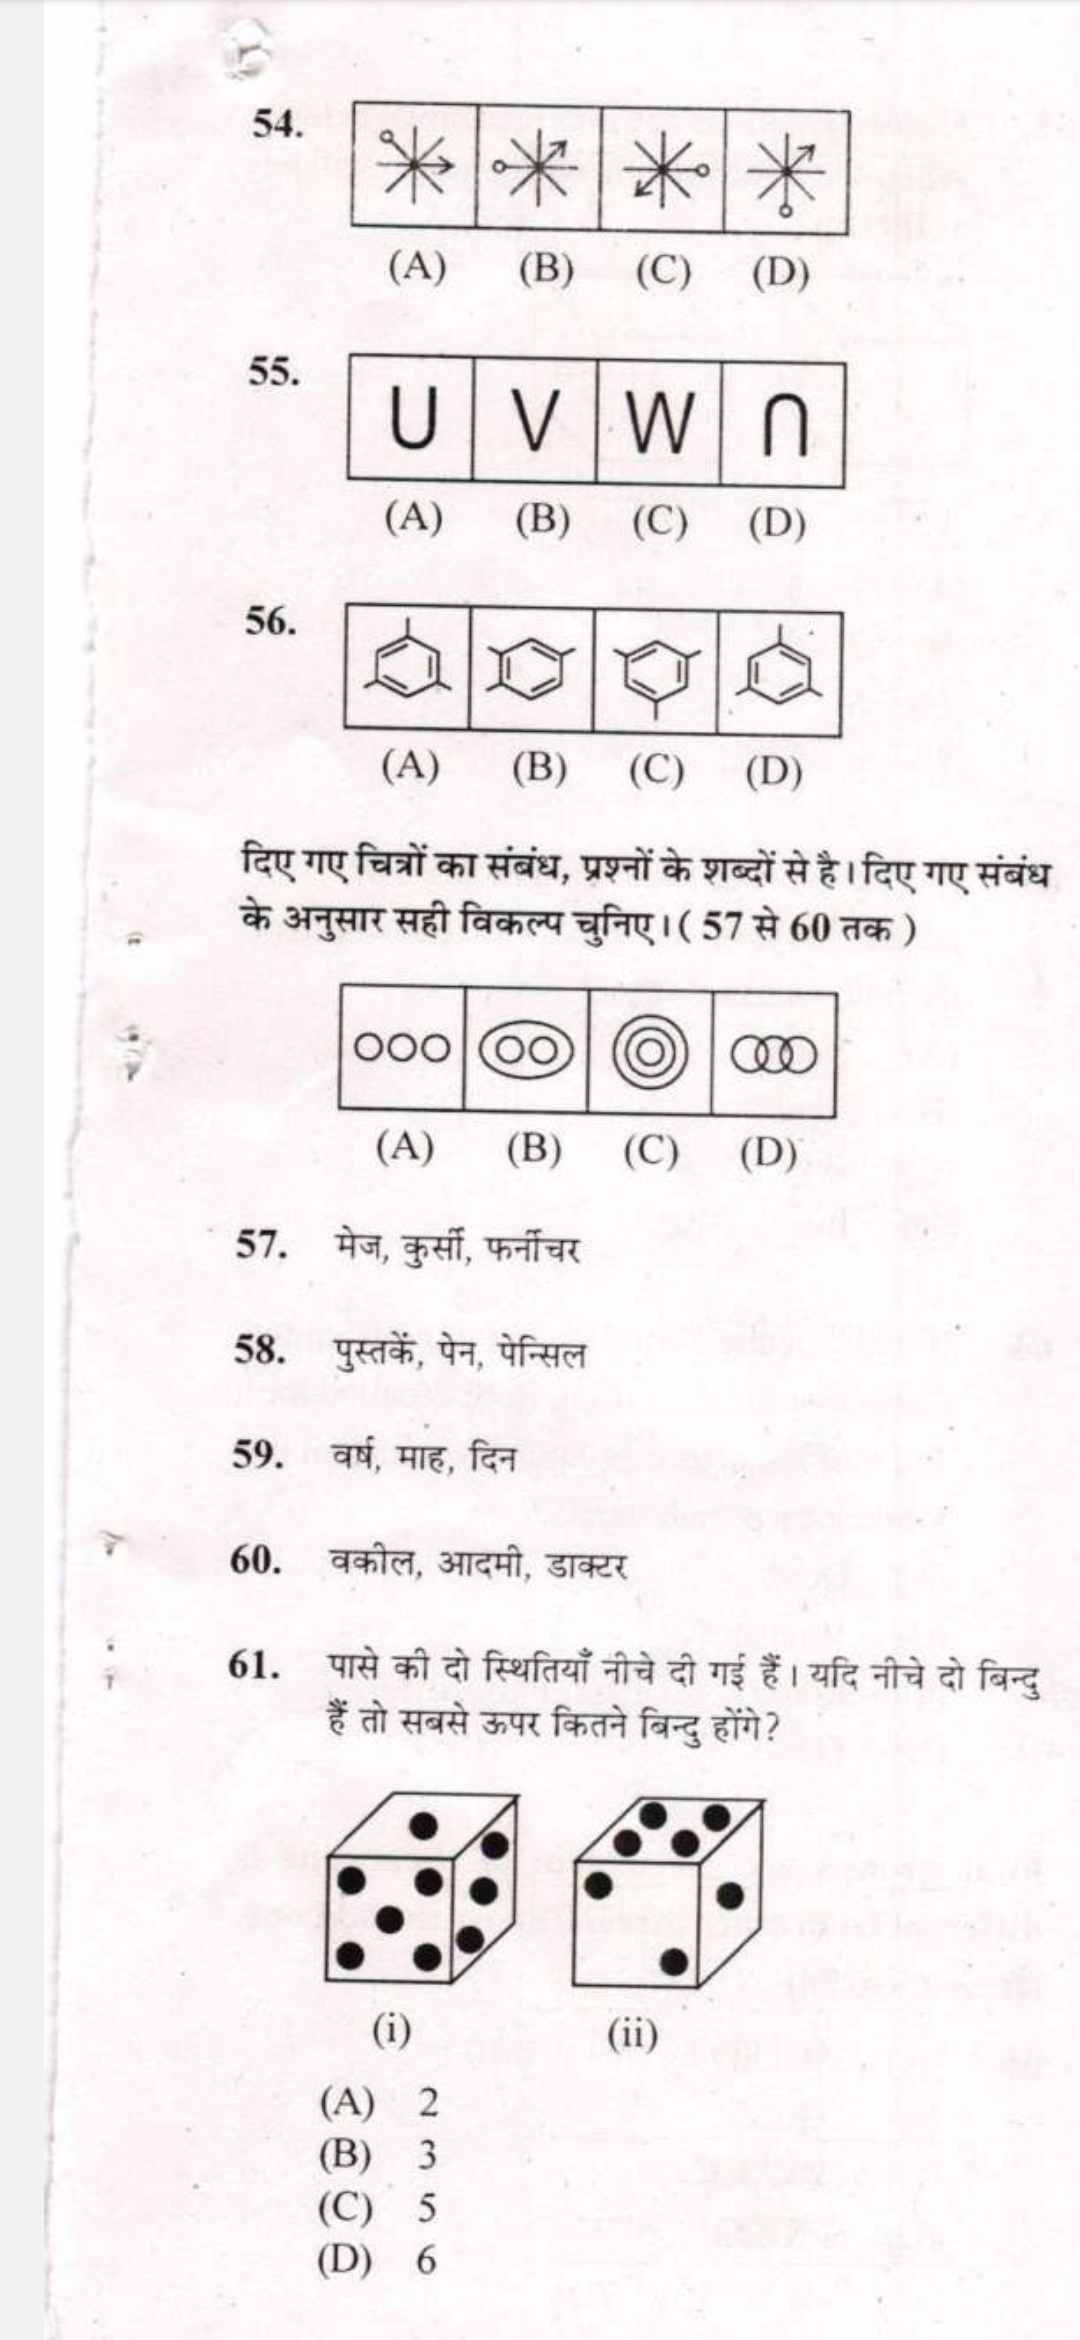 Reasoning questions 54 to 61